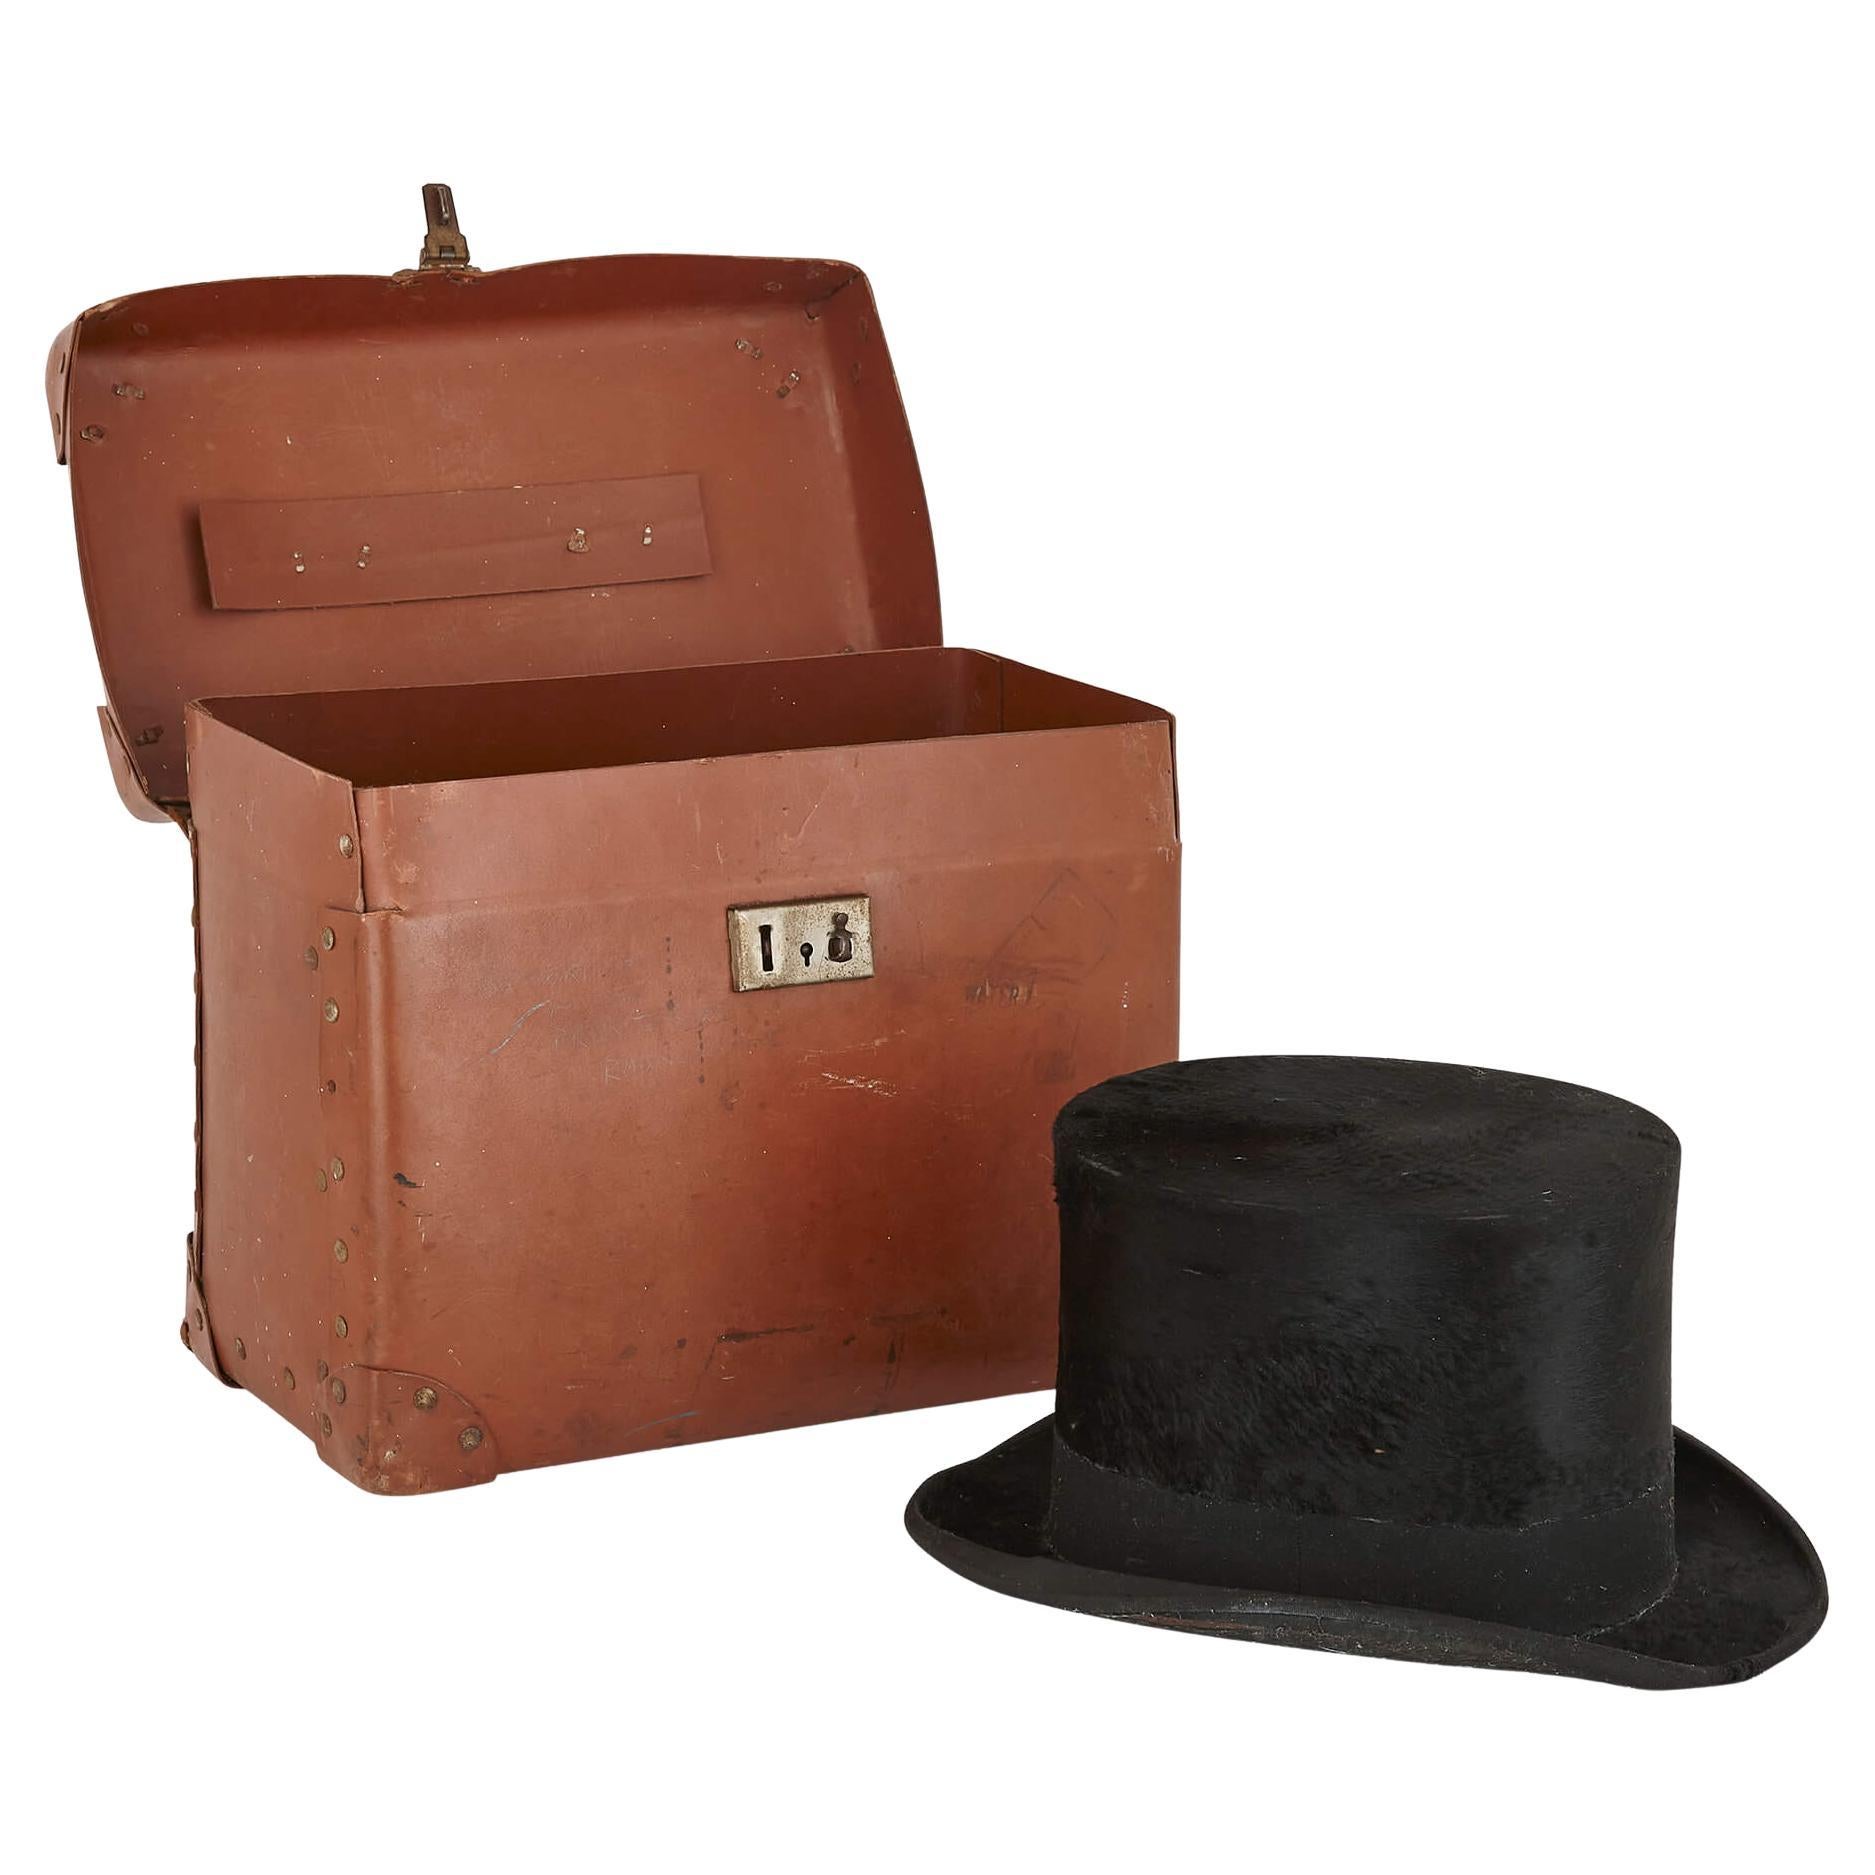 Vintage Travel Case and Top Hat by Tress & Co., London